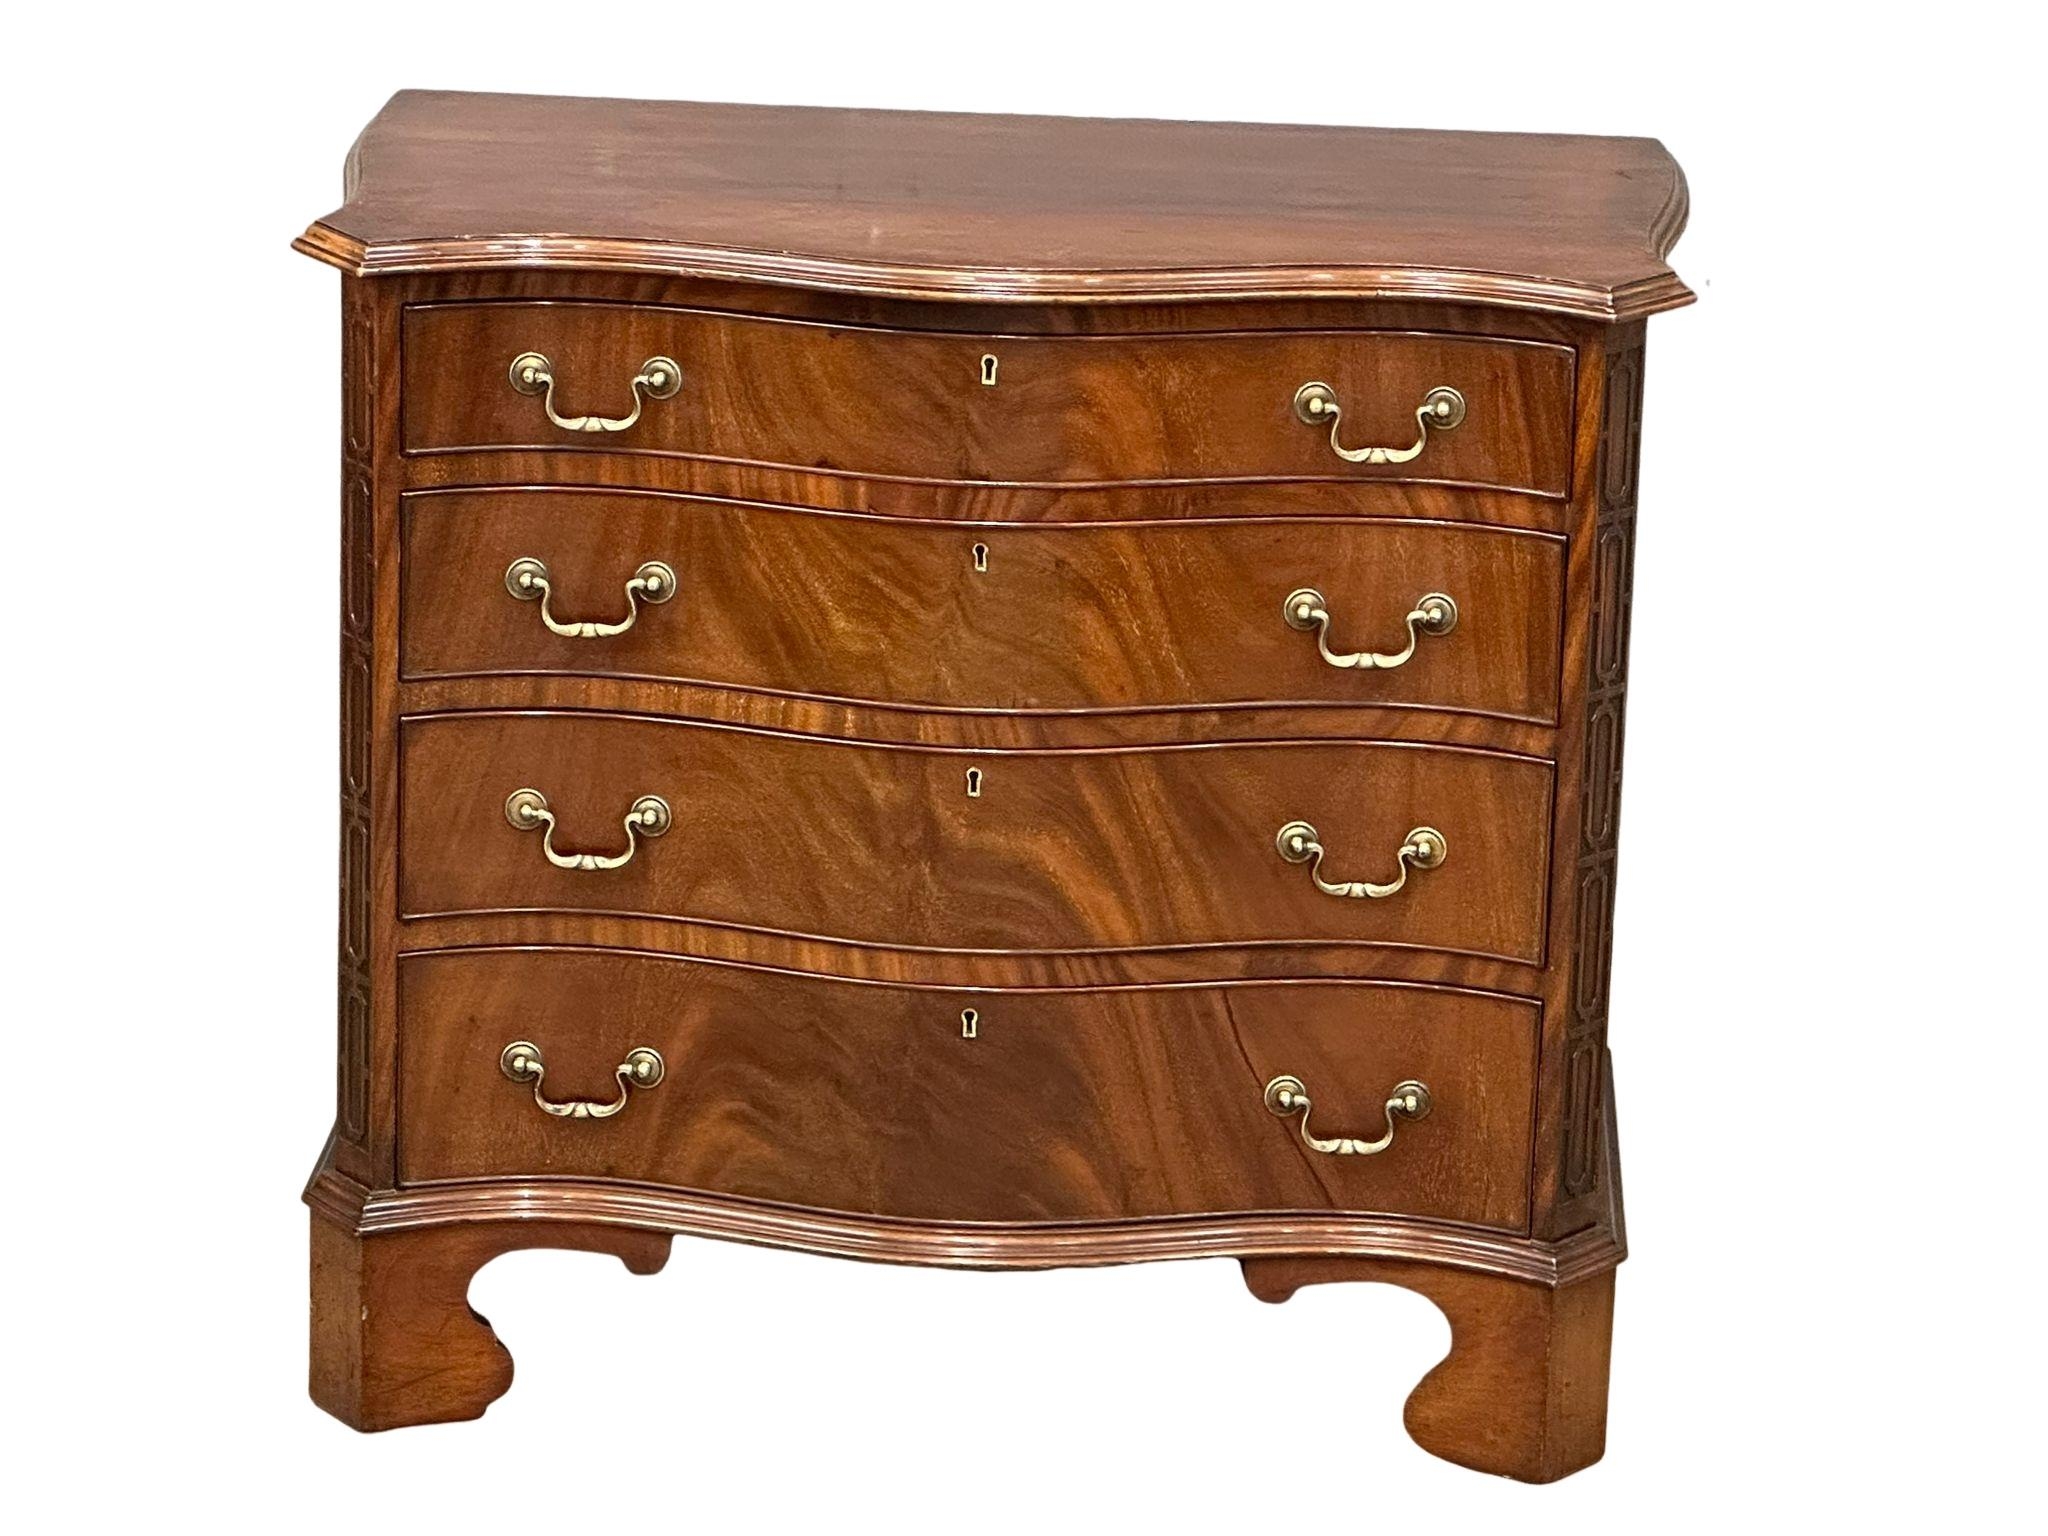 A good quality late 19th century Chippendale Revival mahogany serpentine front chest of drawers. - Image 21 of 22